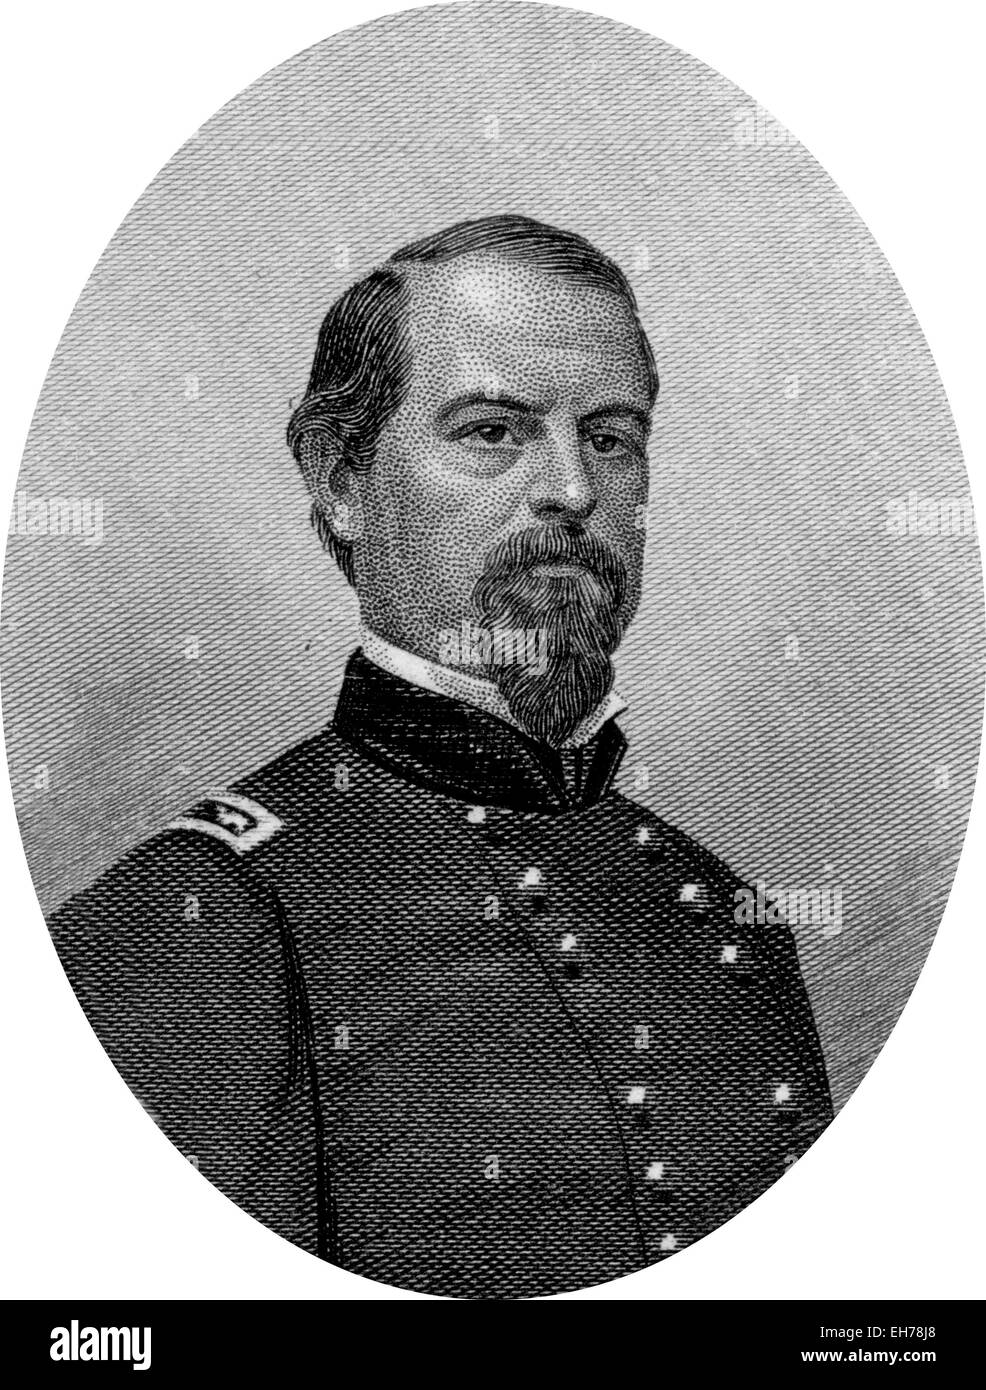 Engraving of Union Major General Irwin McDowell. Original engraving by John Buttre, circa 1866. Stock Photo